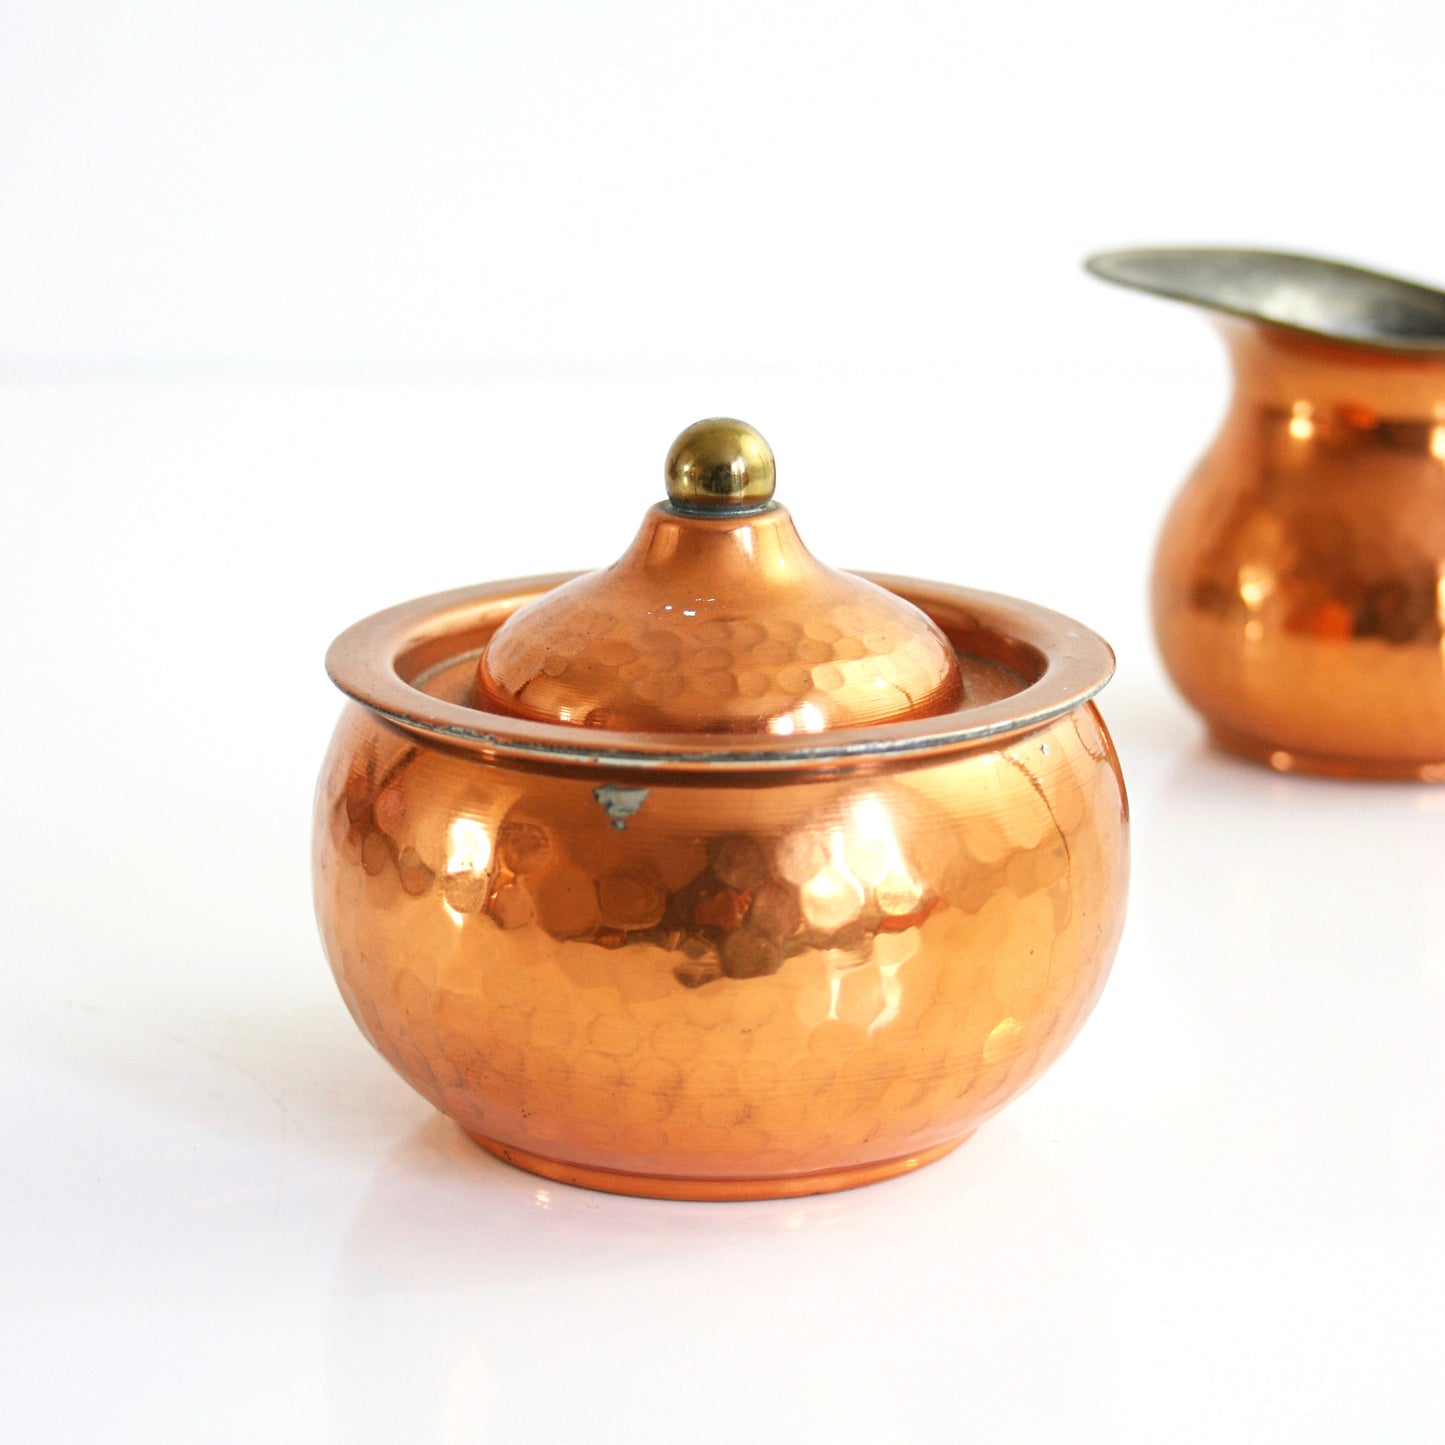 SOLD - Vintage Hammered Copper and Brass Cream and Sugar Set